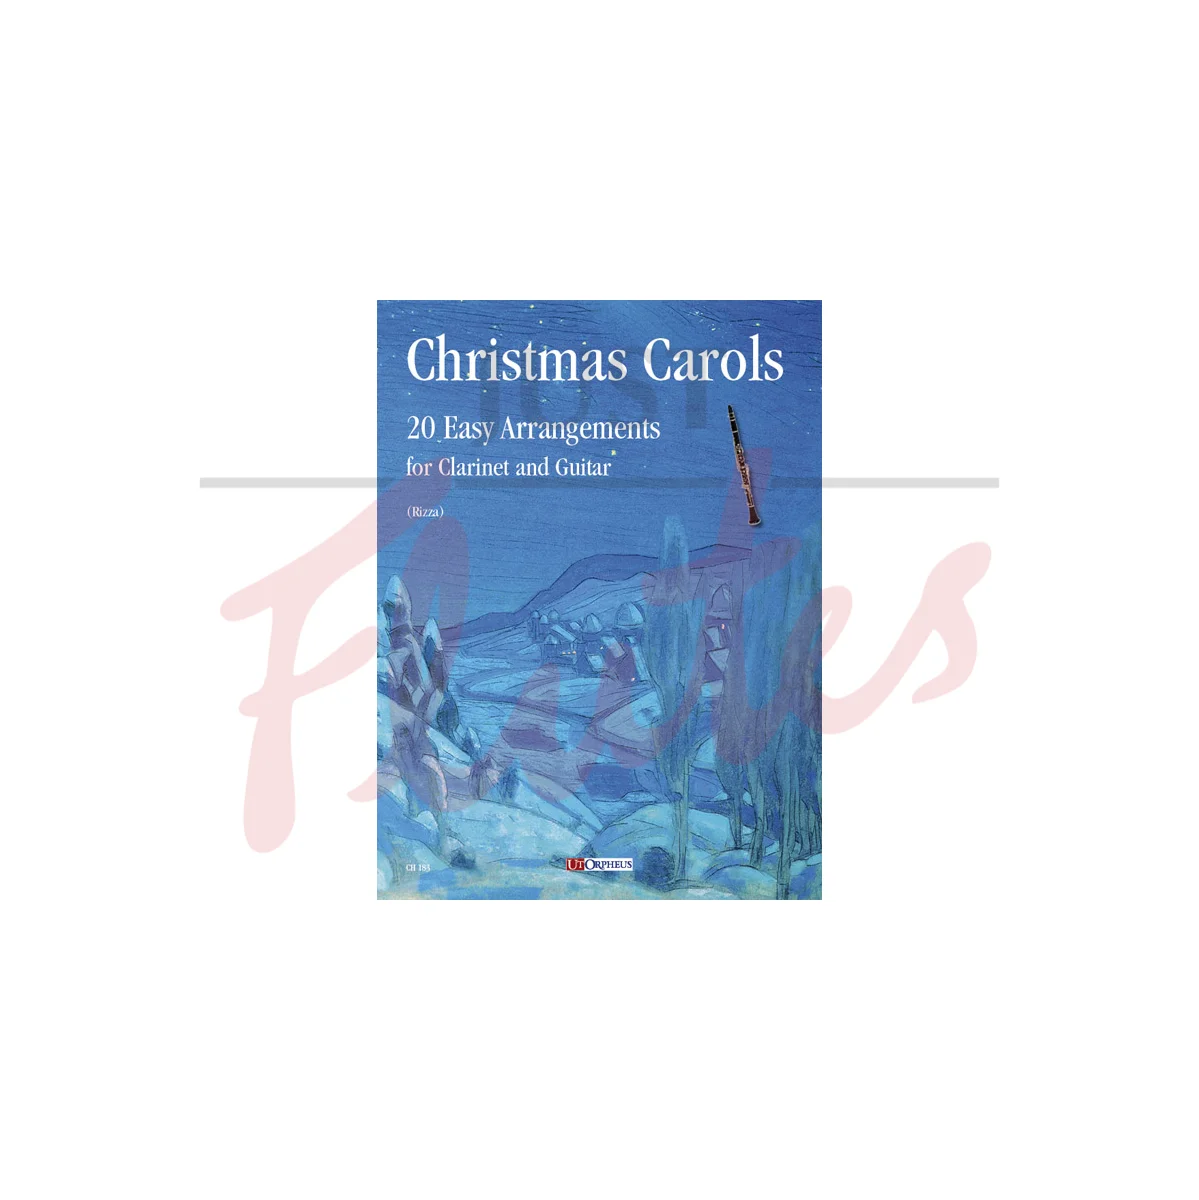 Christmas Carols: 20 Easy Arrangements for Clarinet and Guitar